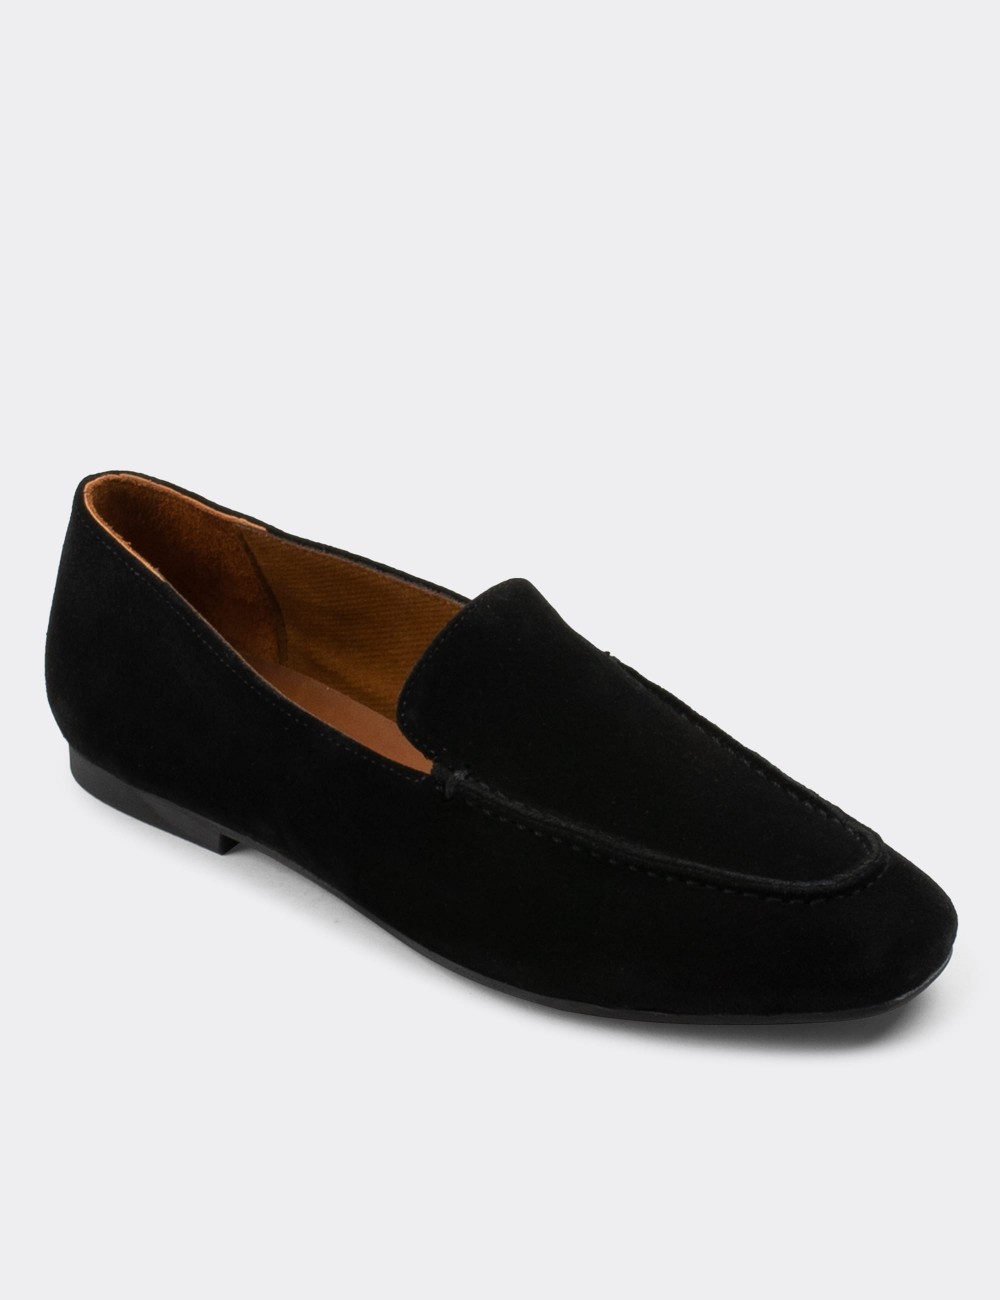 Black Suede Leather Loafers Shoes - 01990ZSYHC01